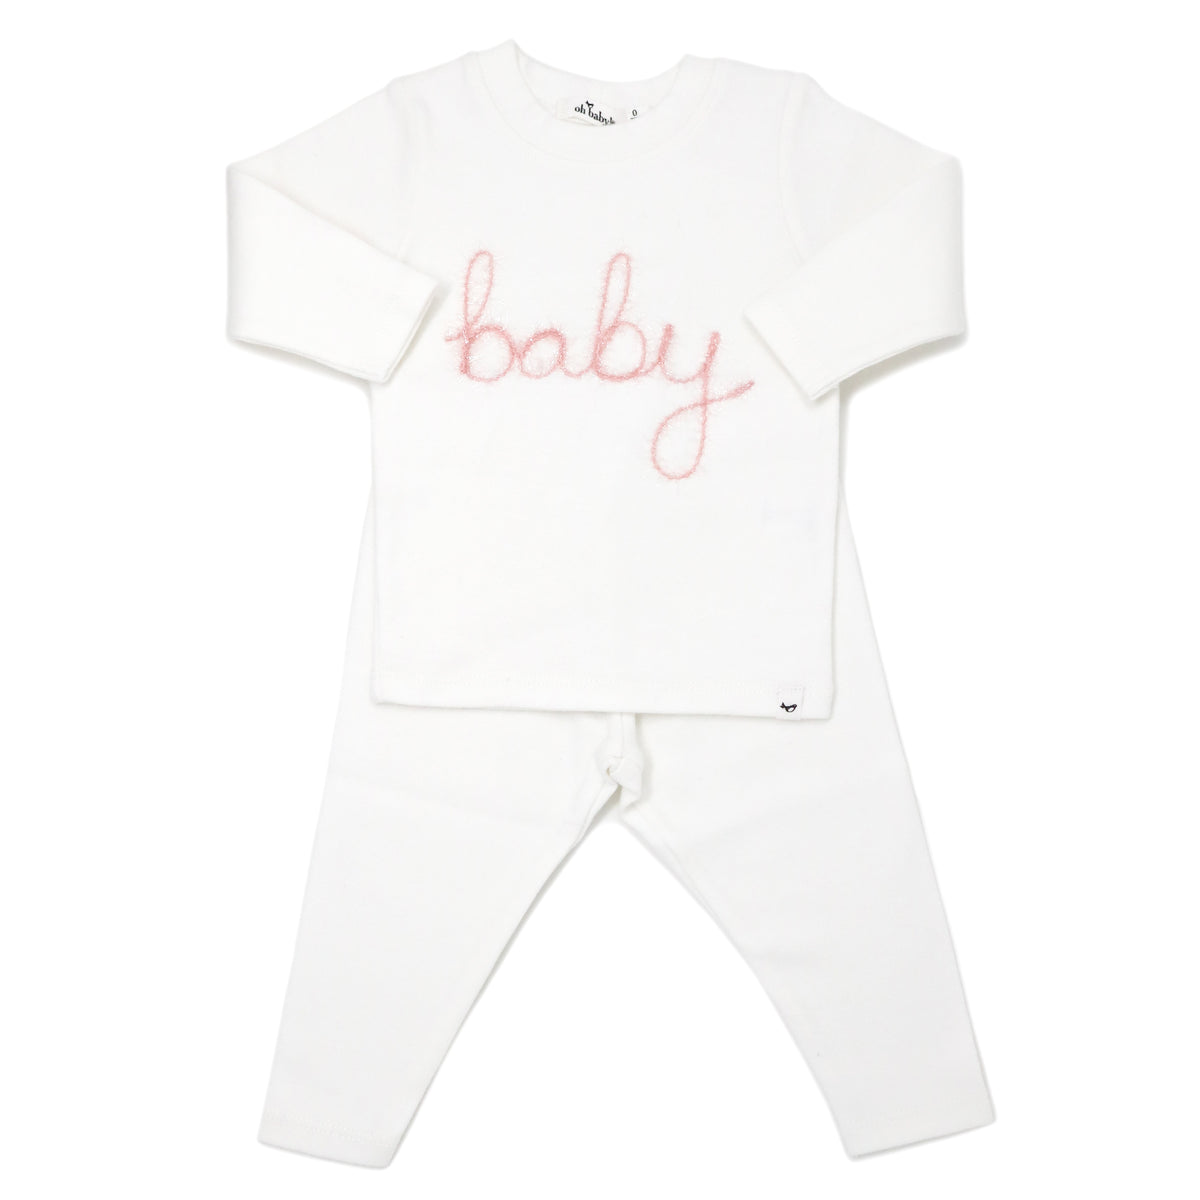 oh baby! Two Piece Set - Baby in Blush Pink/Gold Yarn - Cream